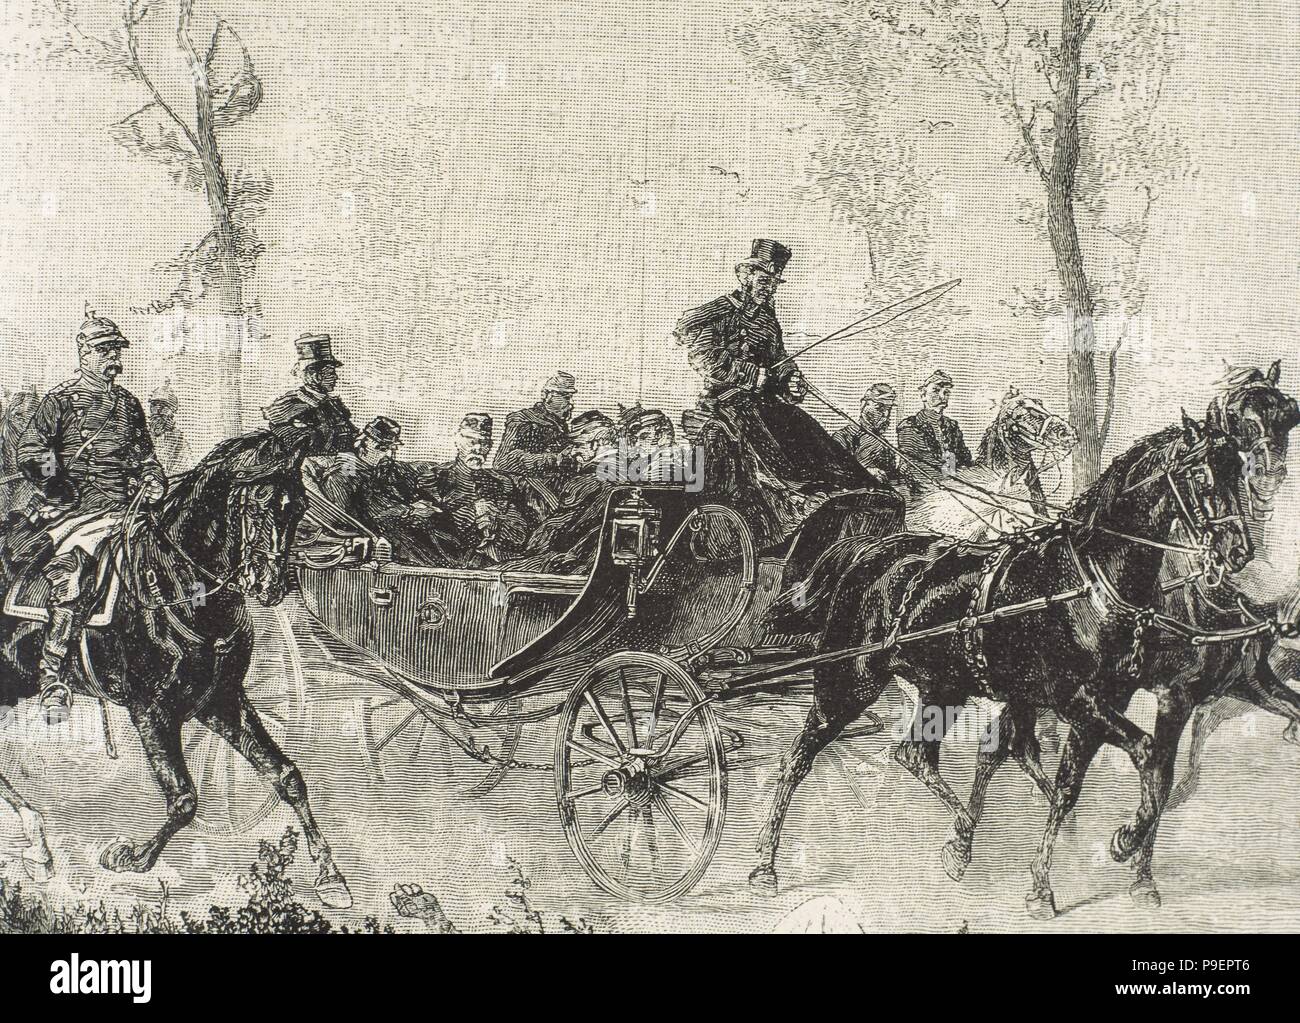 Franco-Prussian War. 1870-1871. Napoleon III Bonaparte (1808-1873) taken prisoner by the Prussian army after the Battle of Sedan (September, 1870). Engraving. 19th century. Stock Photo